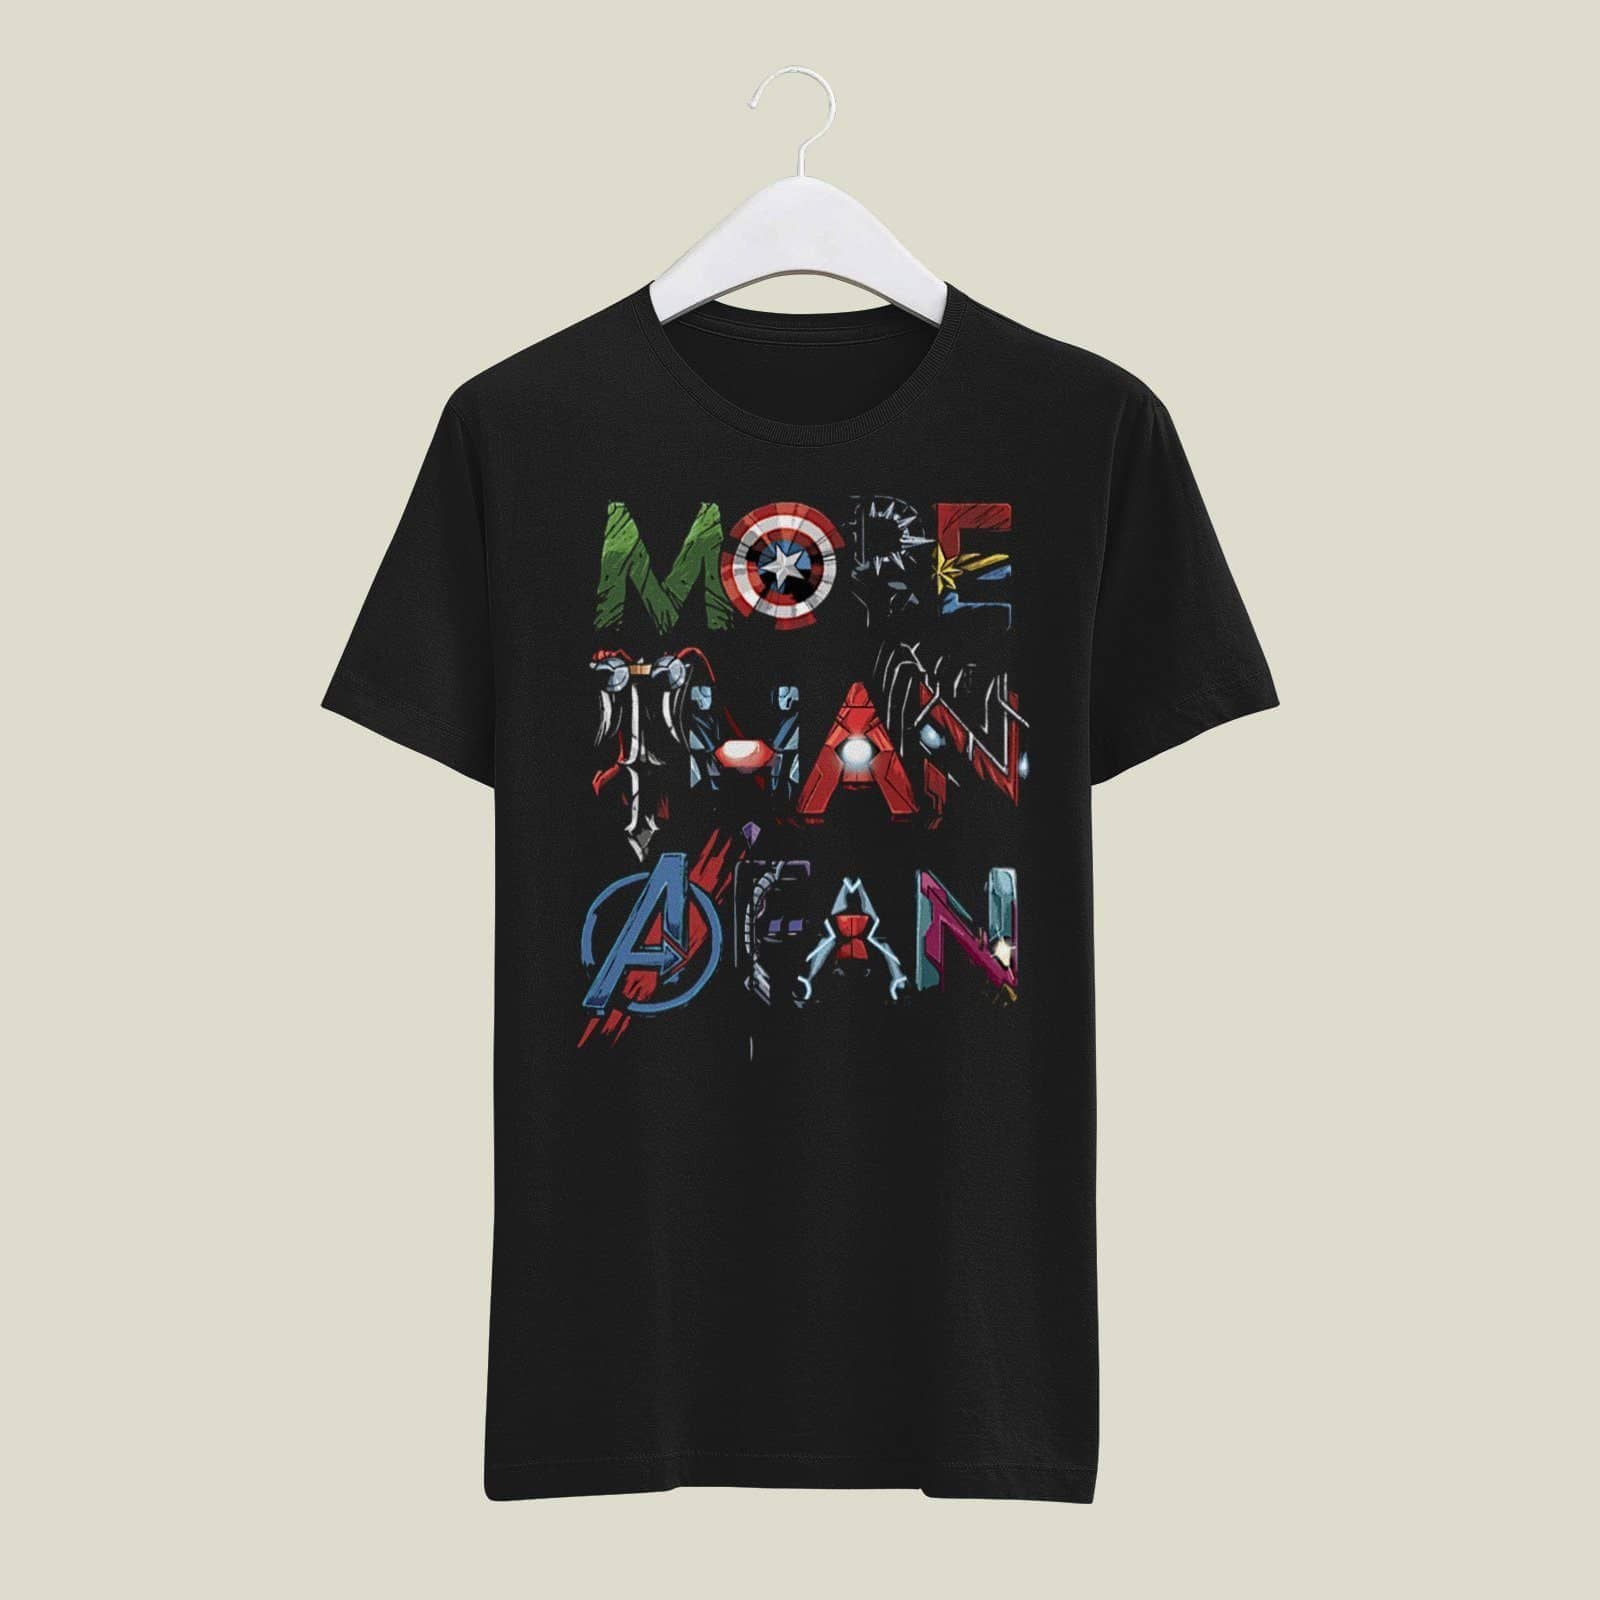 All Original Avengers More Than A Fan Exclusive Black T Shirt for Men and Women - Catch My Drift India  black, clothing, female, general, made in india, marvel, movies, shirt, super, super he